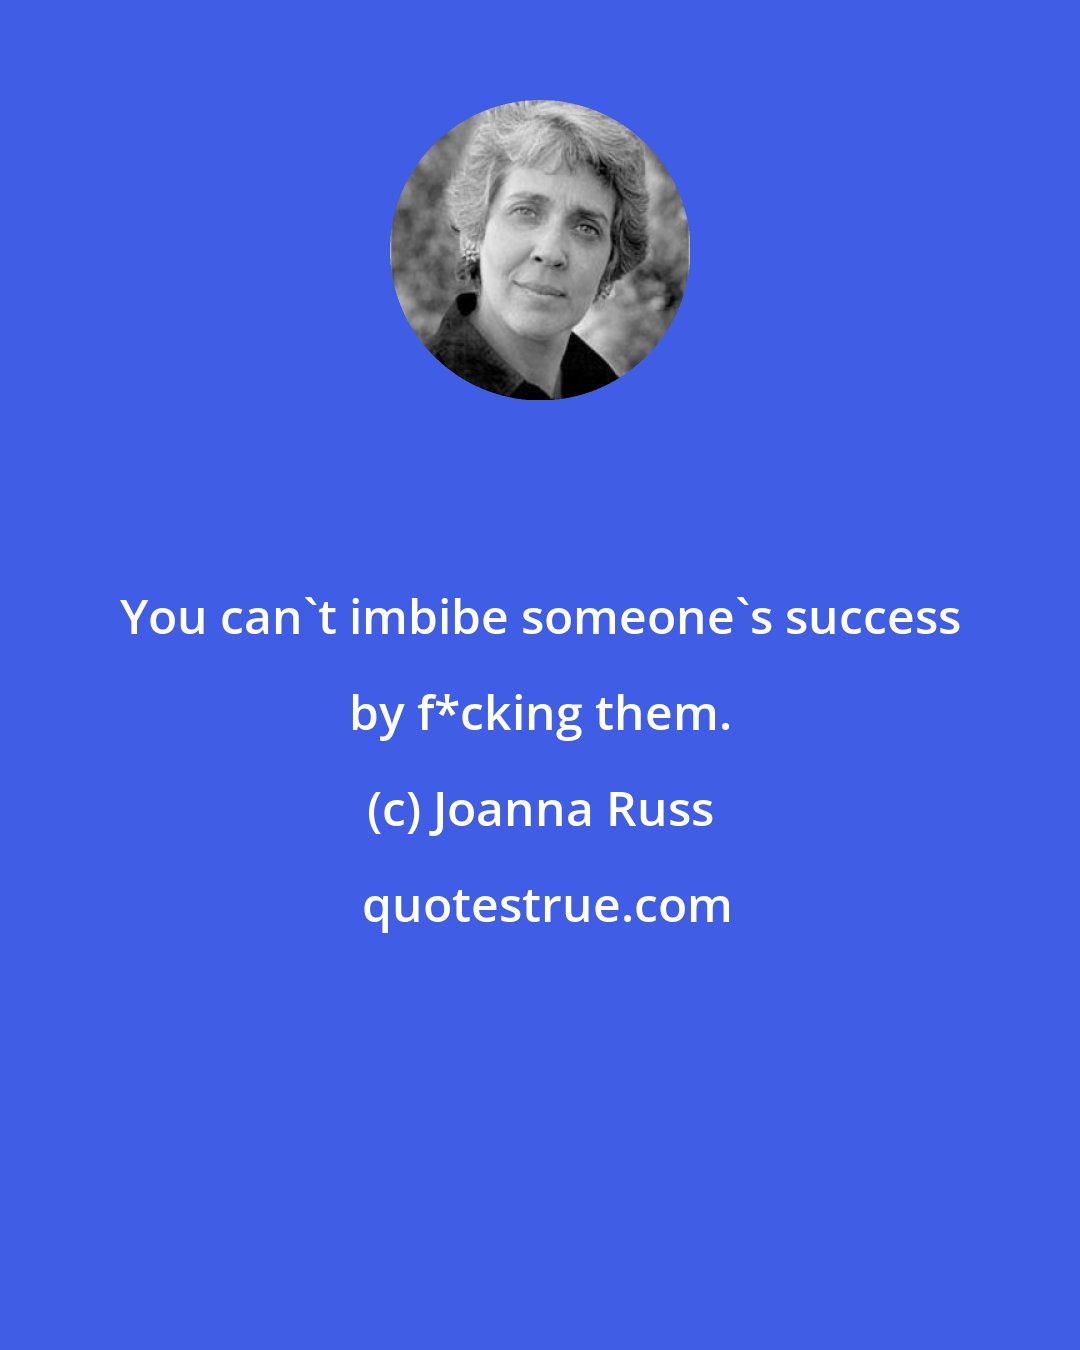 Joanna Russ: You can't imbibe someone's success by f*cking them.